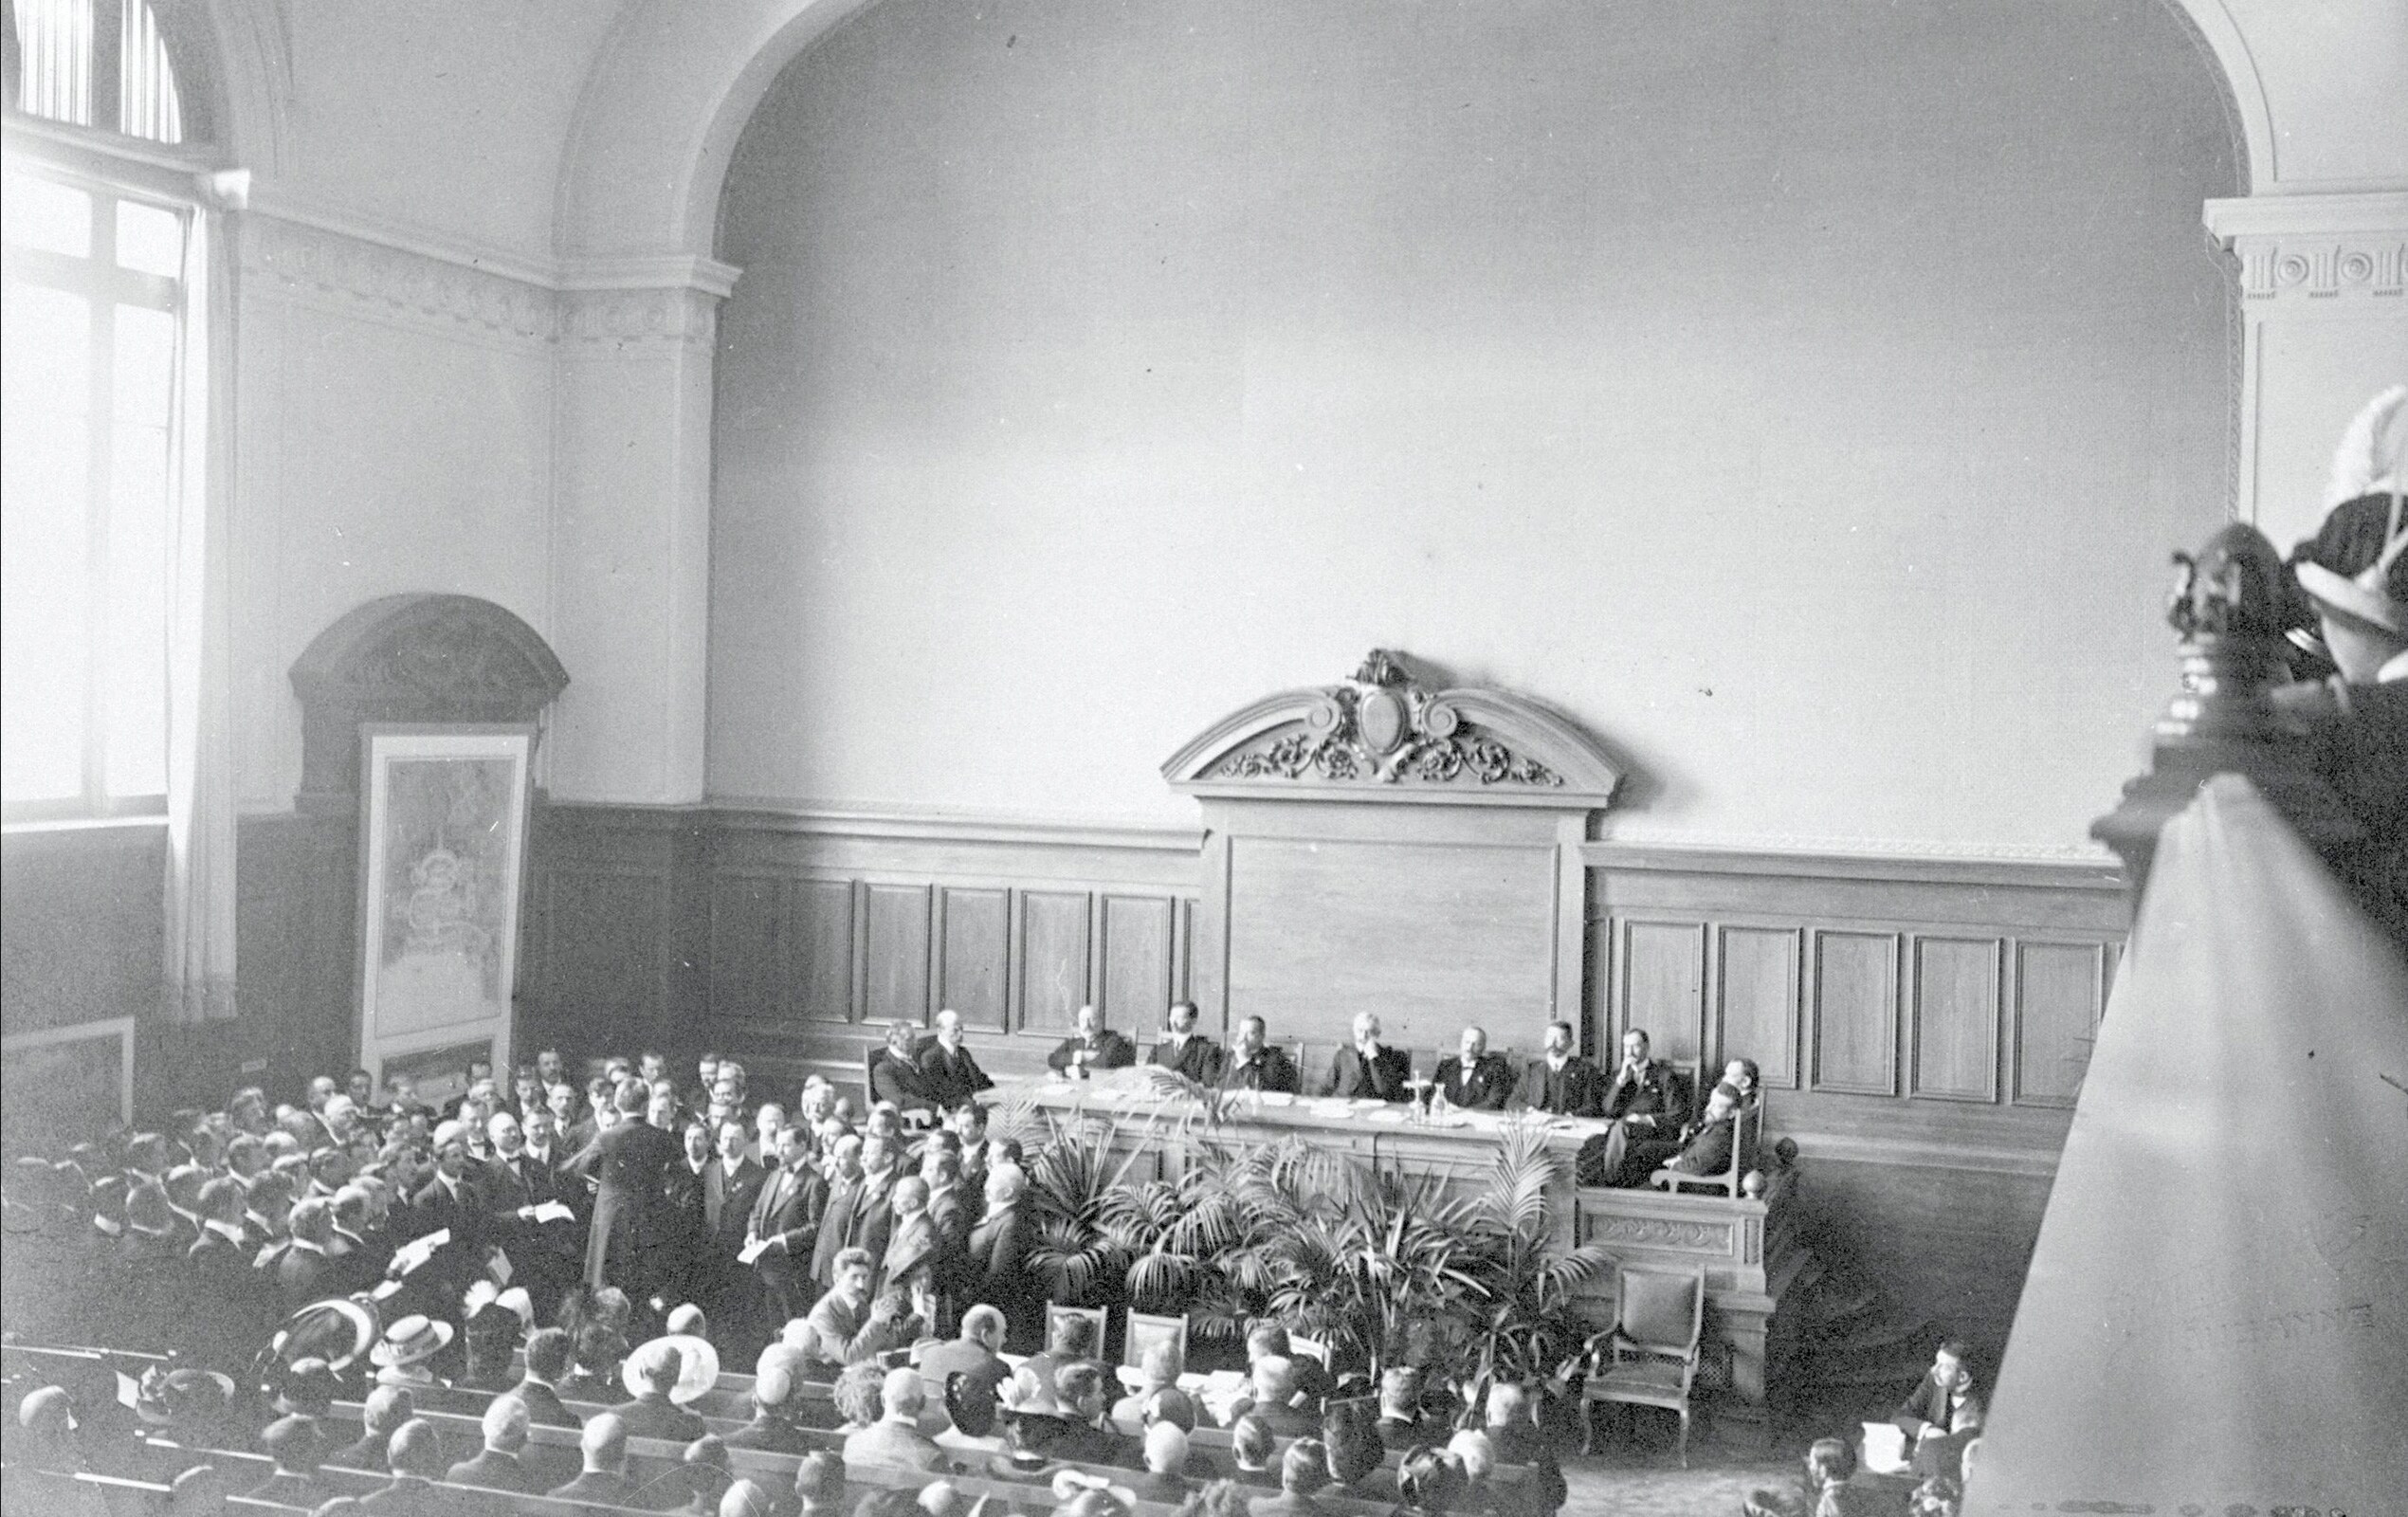  5th Olympic Congress, Lausanne 1913 - Opening Ceremony of the Sports Psychological and physiological Congress, presided by Baron Pierre de Coubertin, IOC President, in the Palace of Rumine.